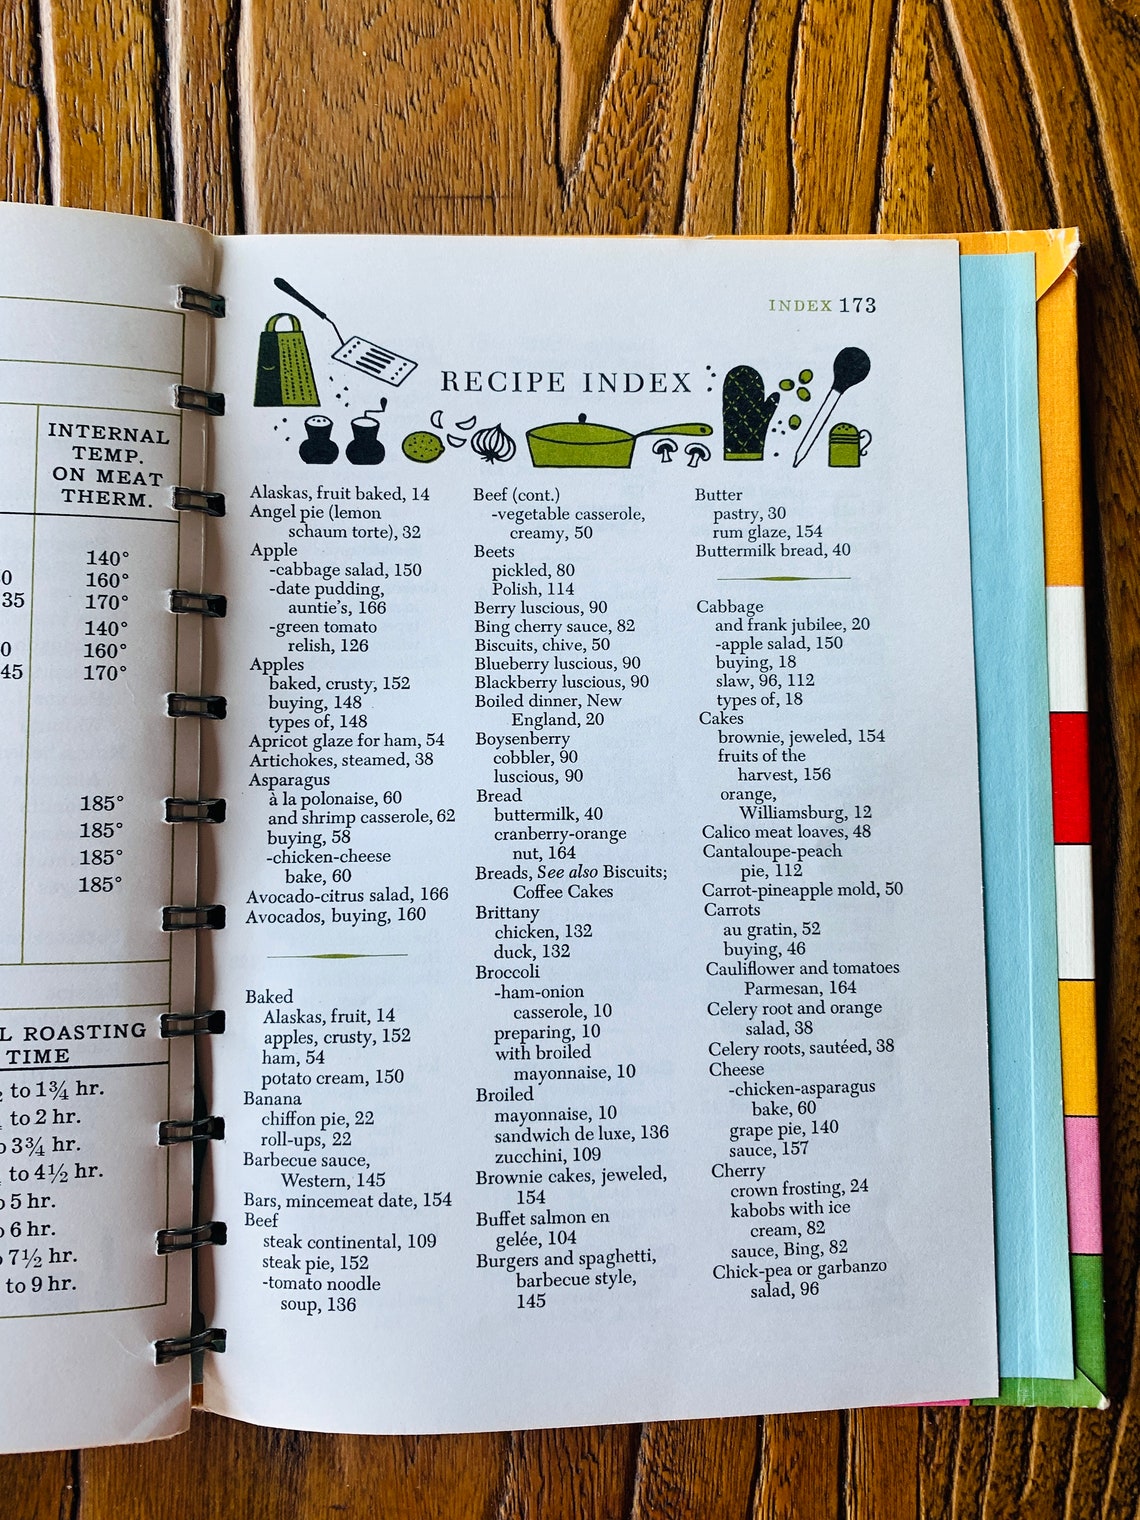 Betty Crocker's Cooking Calendar Guide to Meal Planning Etsy